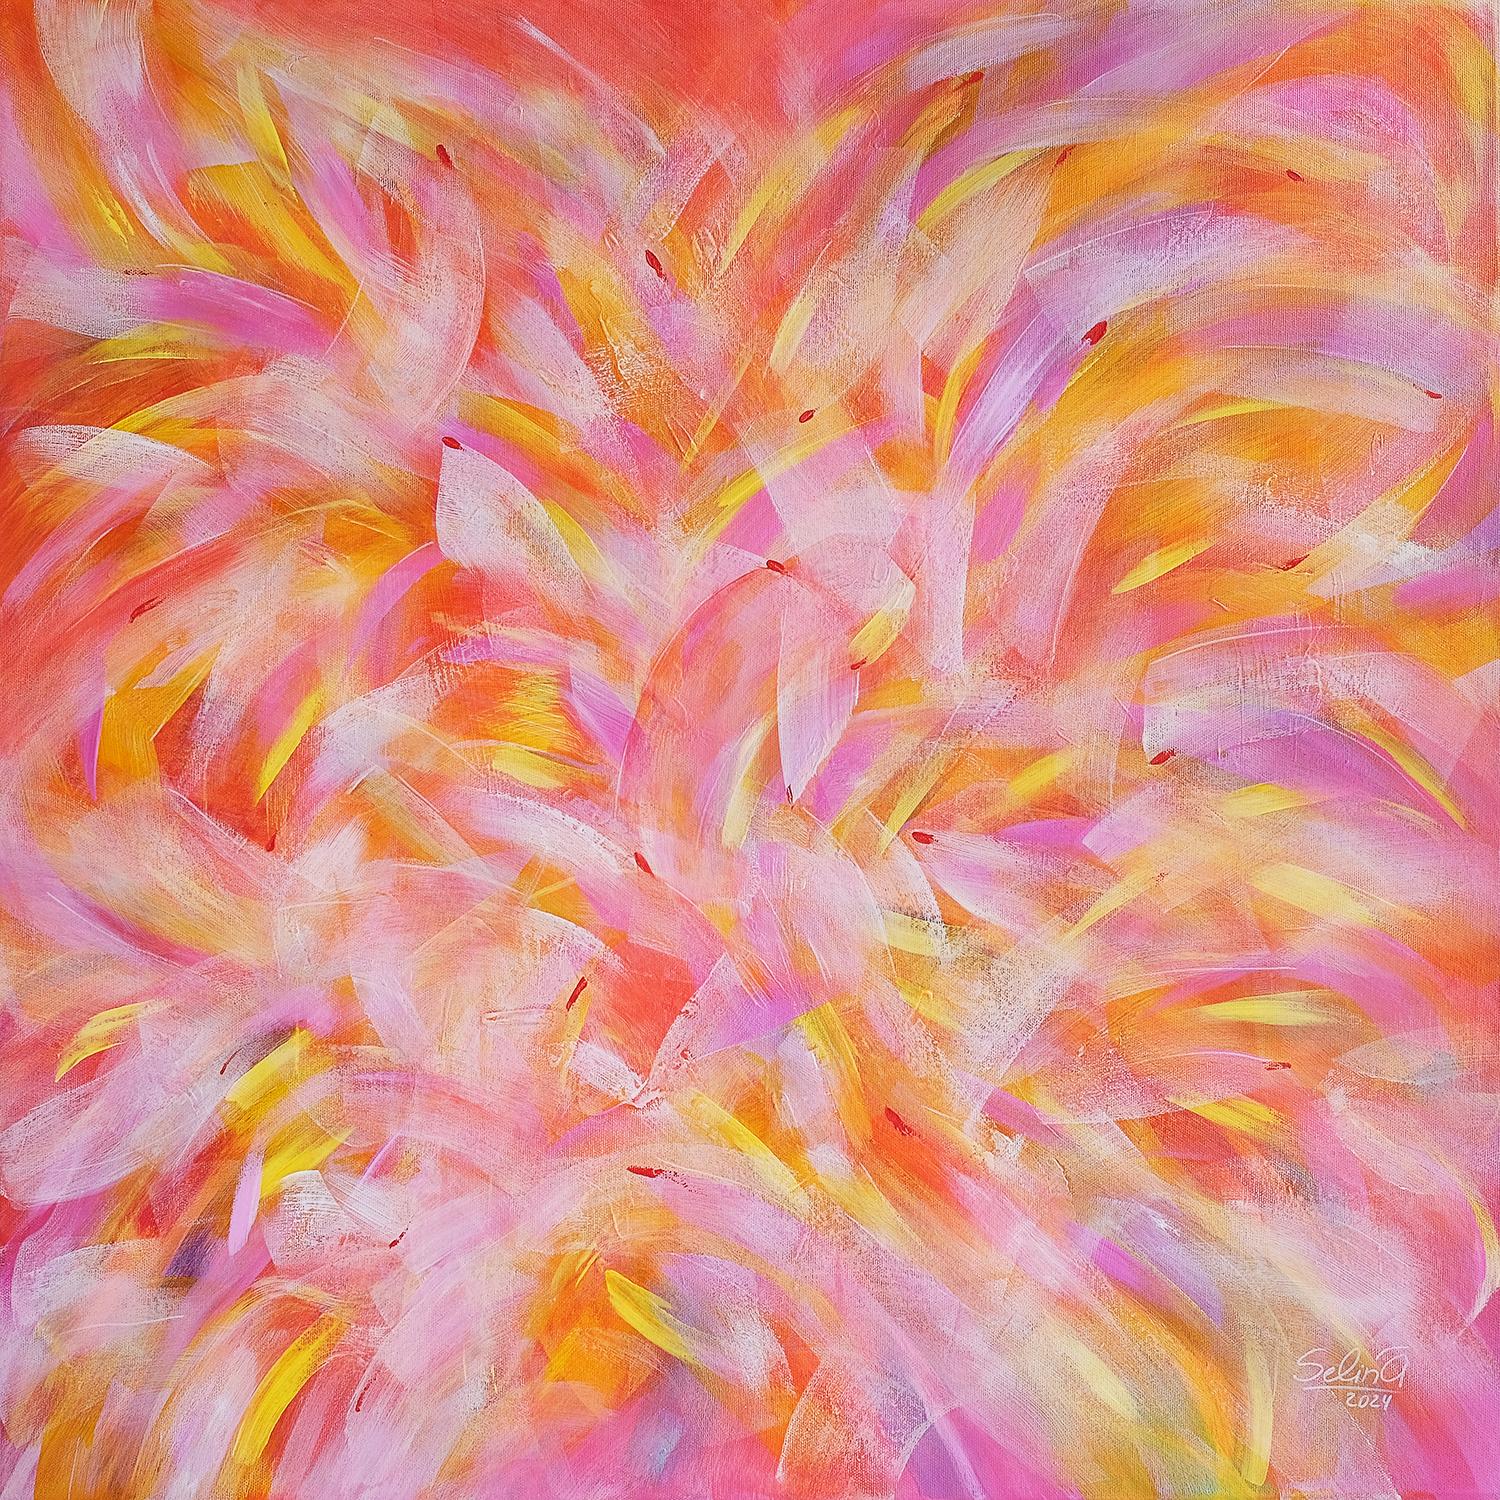 Fire of Life  is  a philosophical painting about passion to life, energy of life, full of sun and joy.  Yellow and orange are colors of our wishes, taste of life, energy and easiness of every day. Red-orange is color of communication and